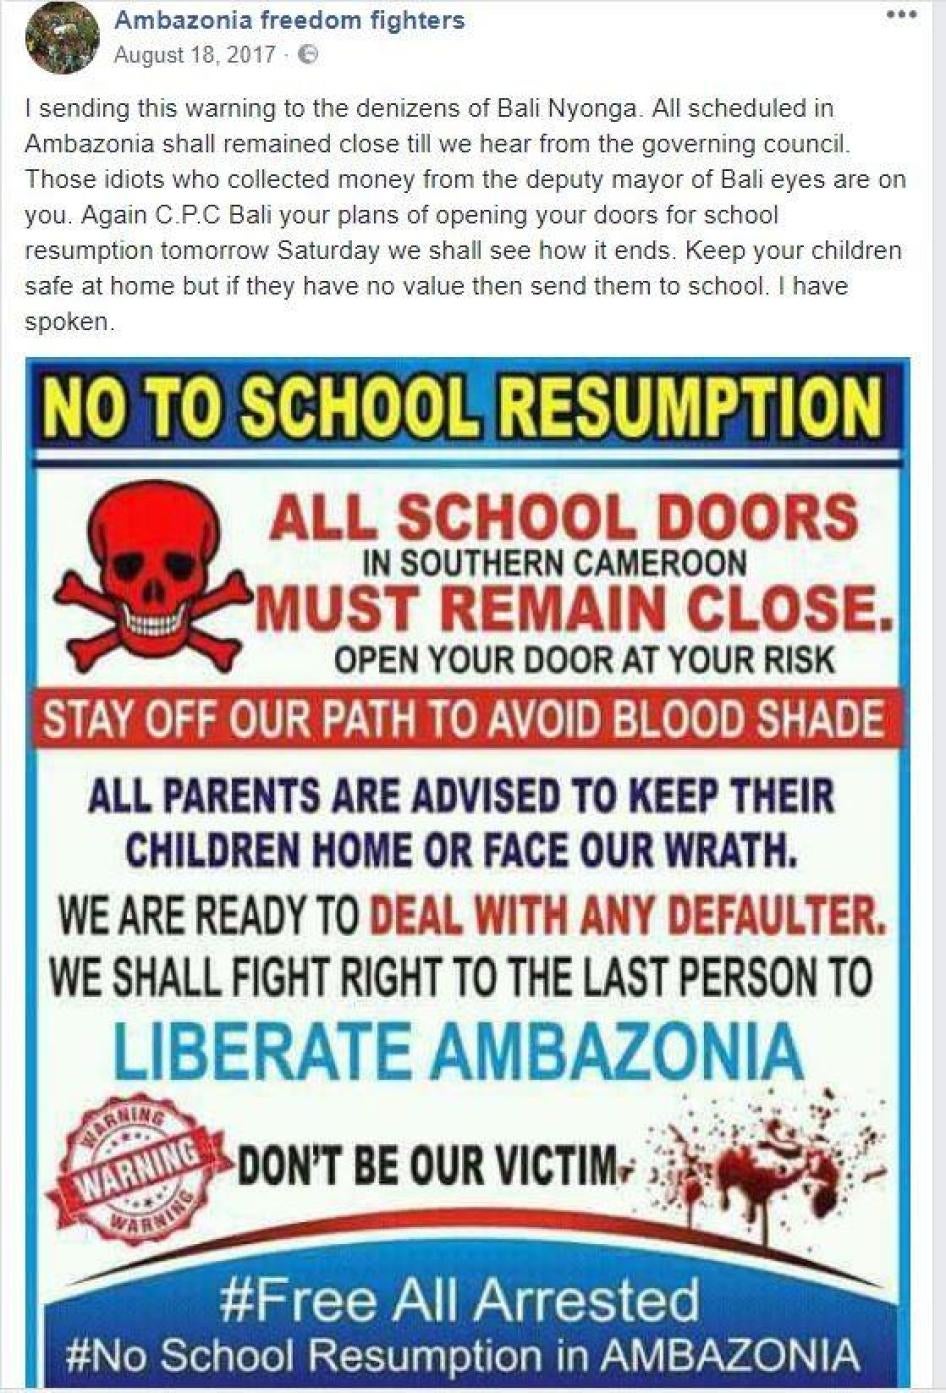 Figure 1 – A graphic threatening parents and children to boycott schools, circulated on Facebook by “Ambazonia Freedom Fighters,” on August 18, 2017.